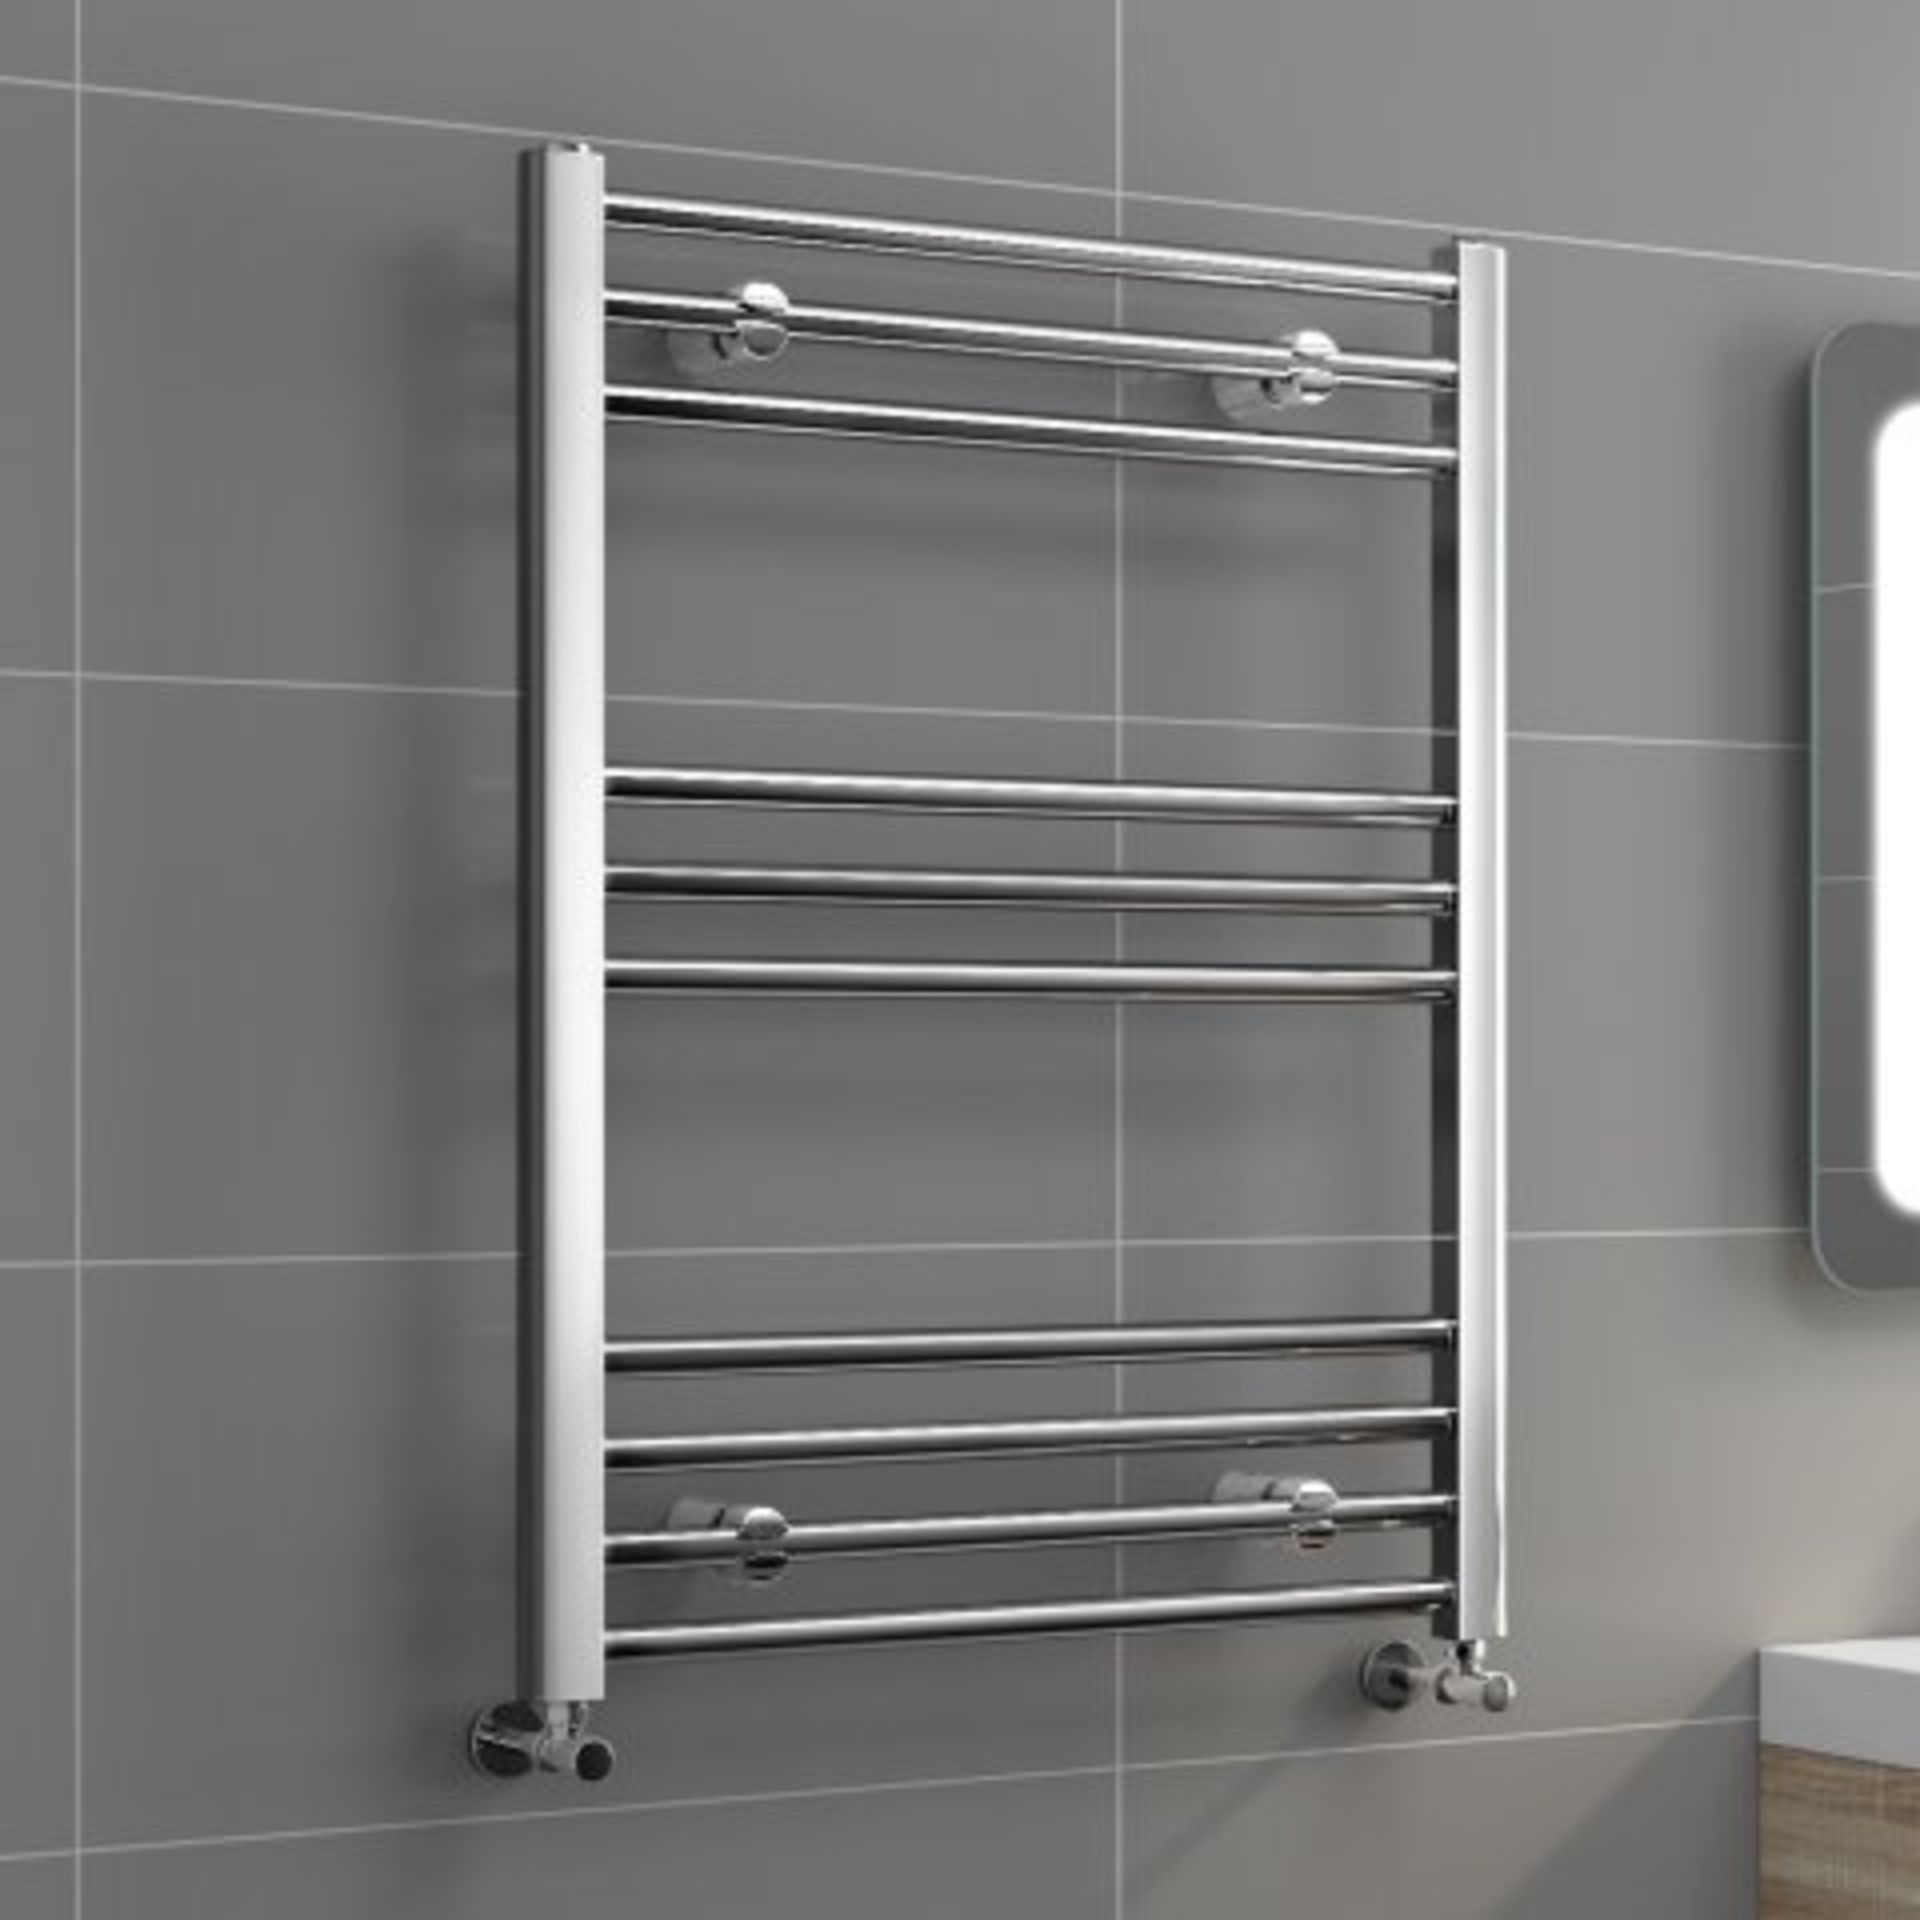 (N195) 1800x500mm Mirrored Anthracite Double Oval Panel Radiator RRP £499.99. Designer Touch This